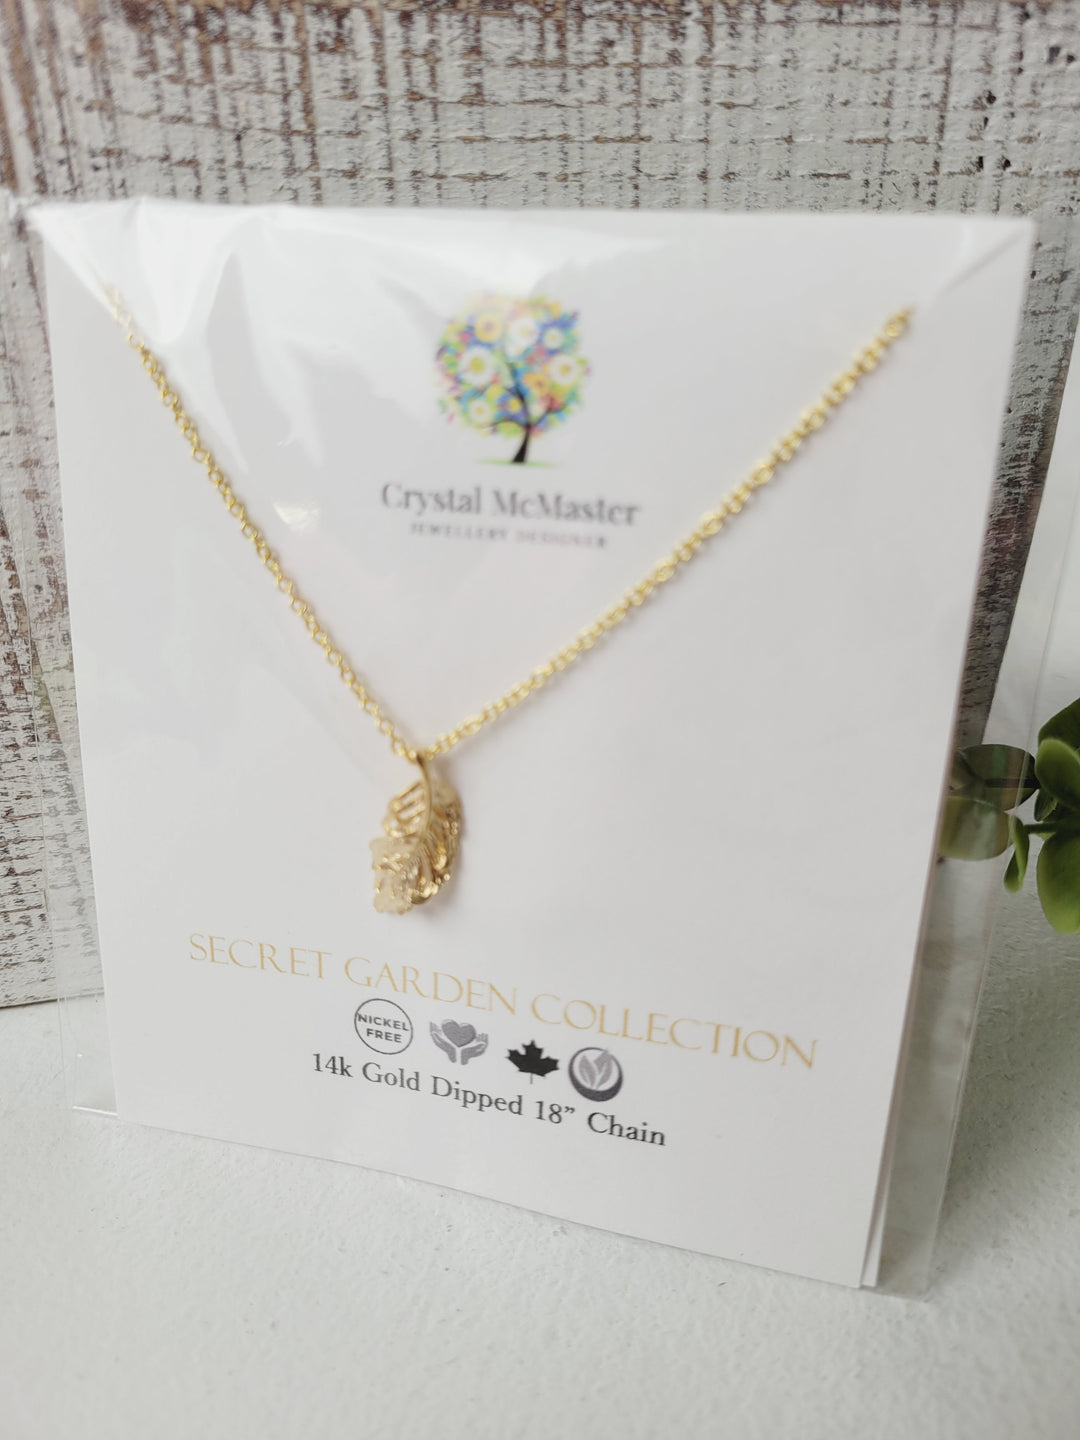 Crystal McMaster Jewellery, Secret Garden 14K Gold Dipped Necklace Collection